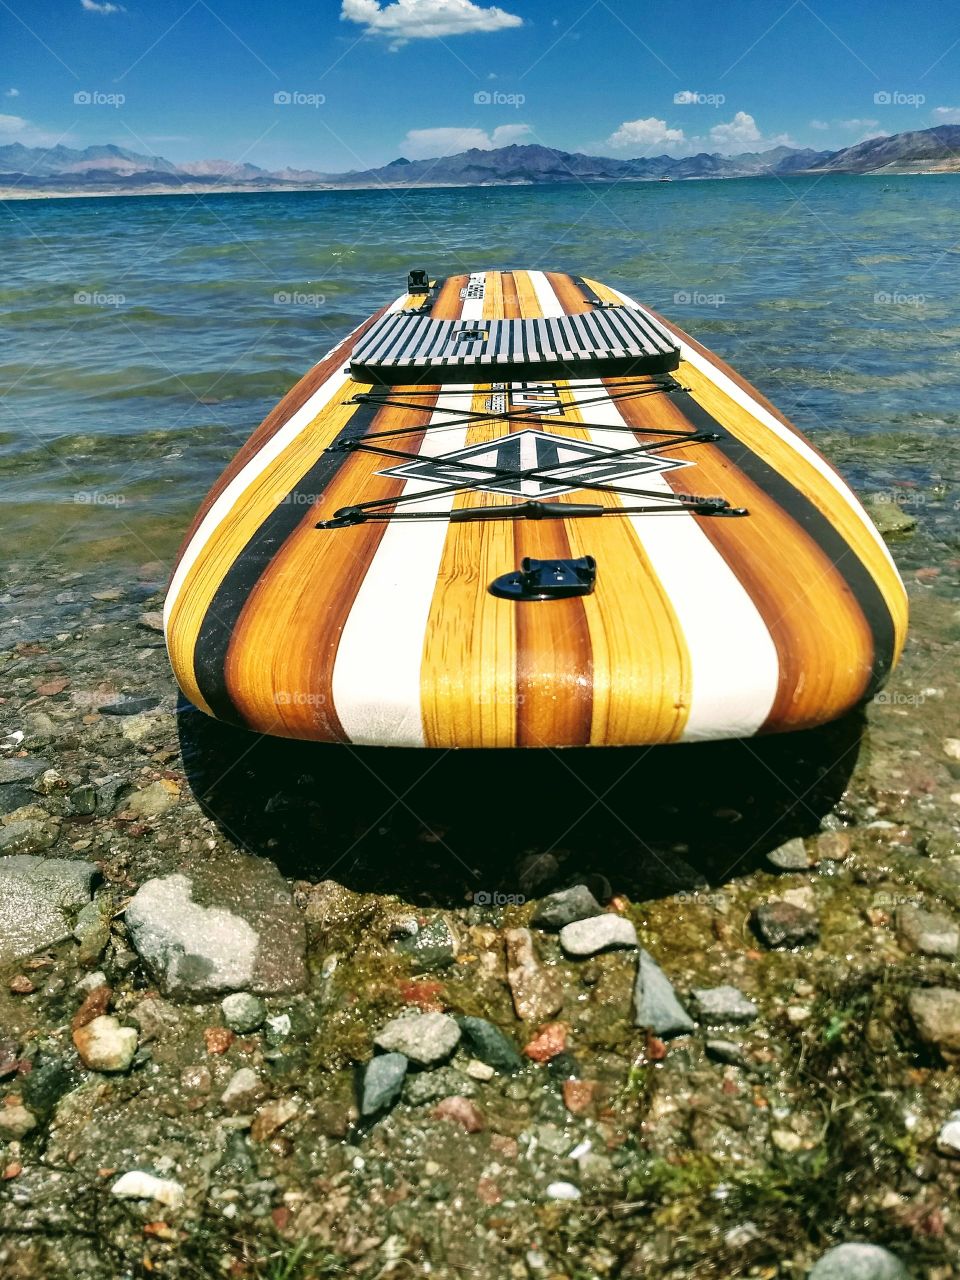 paddle your troubles away